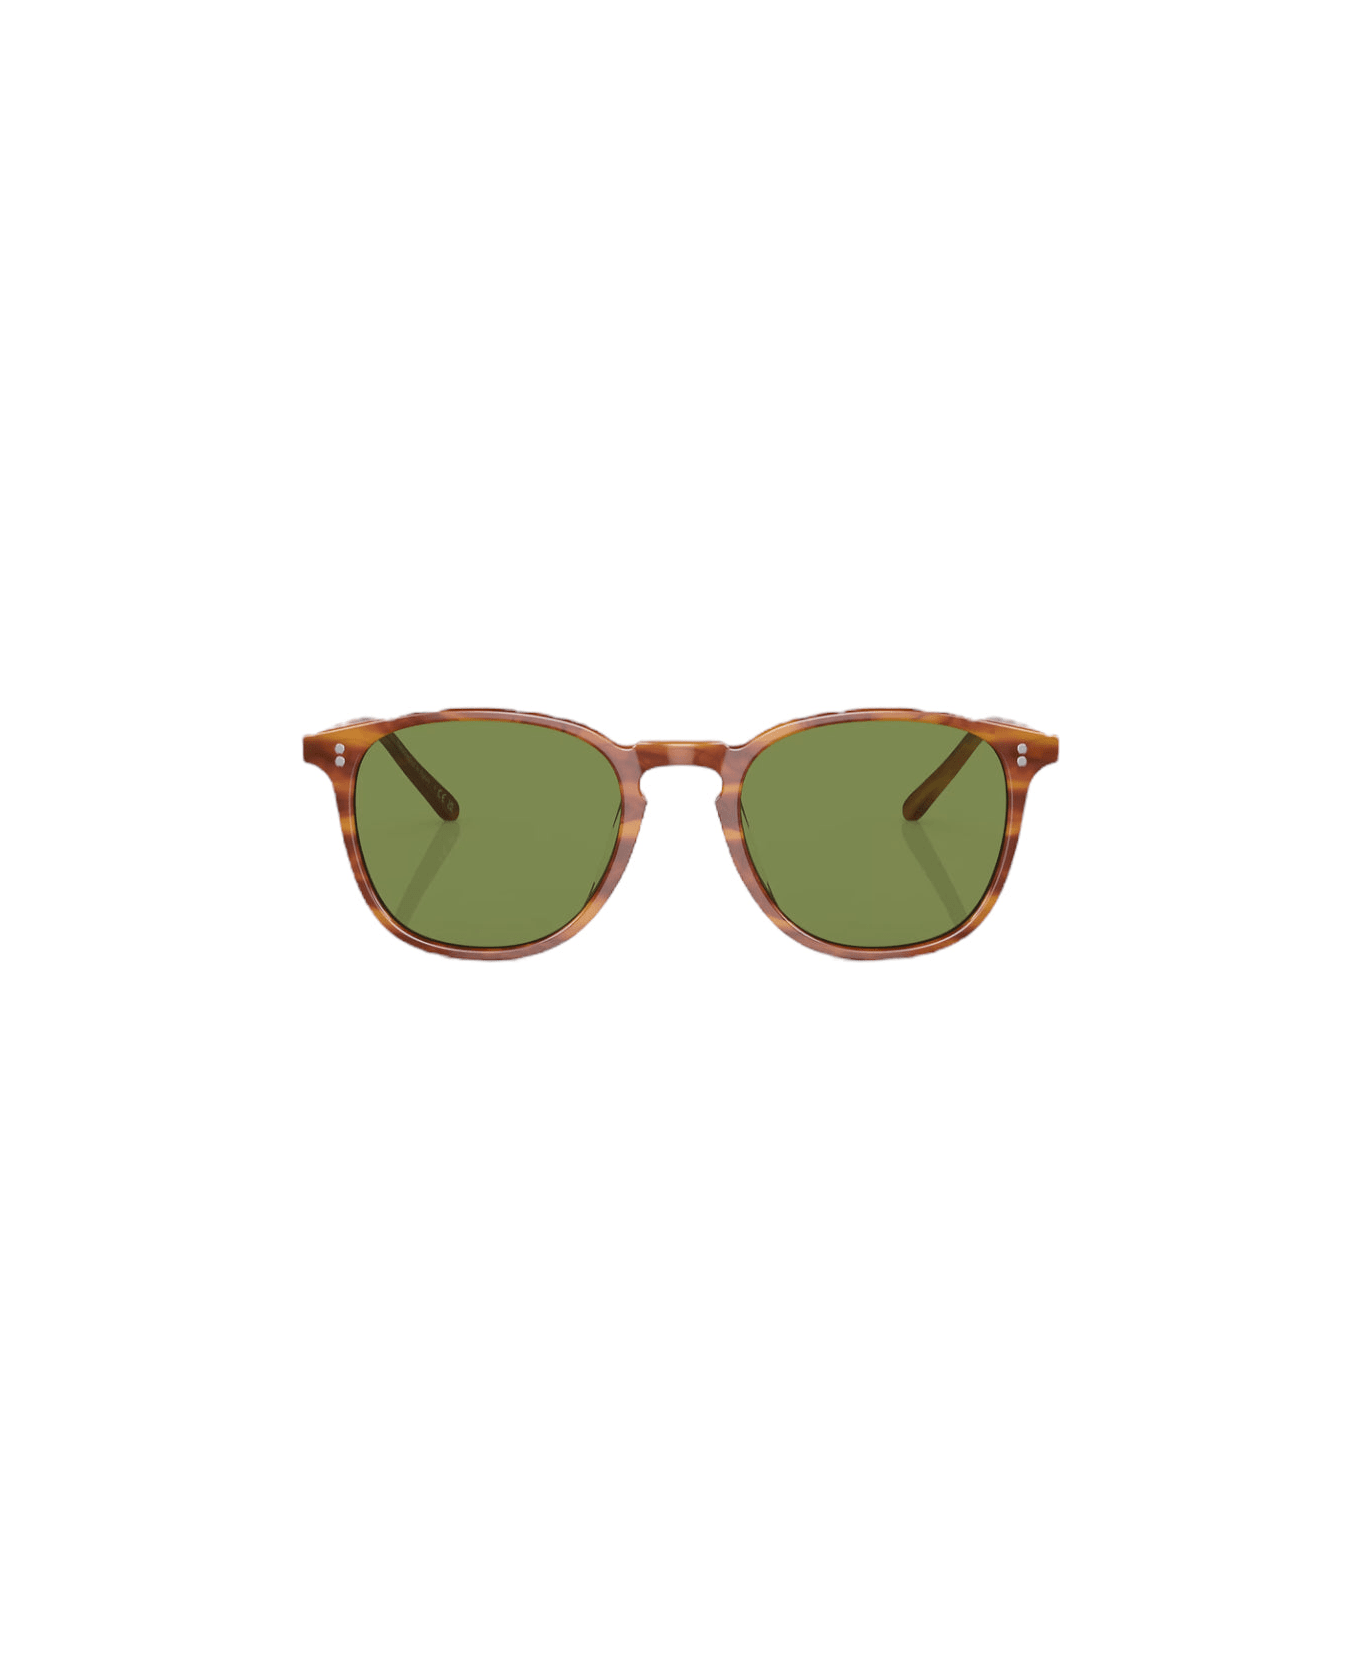 Oliver Peoples Finley Sun 1993 Sunglasses